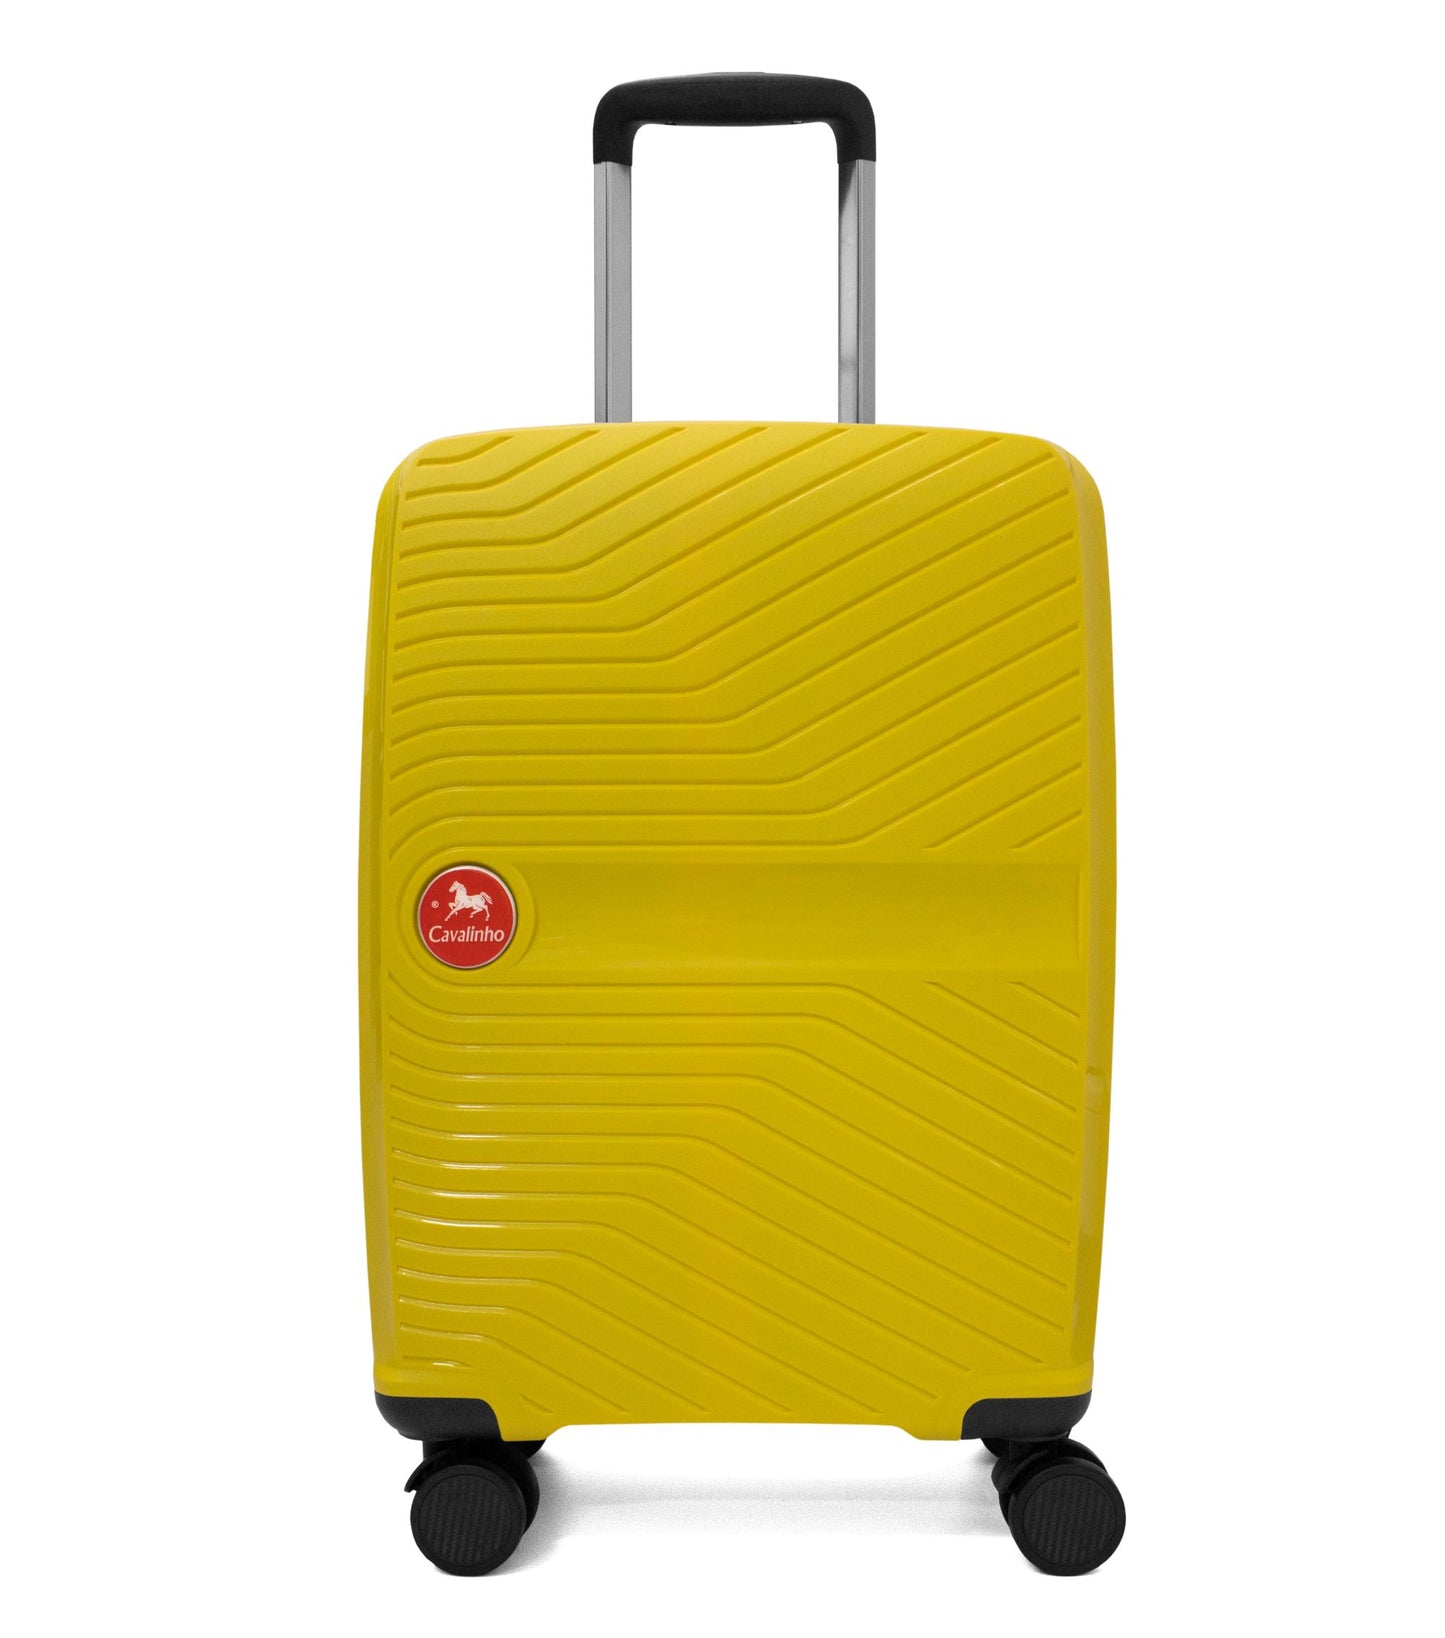 #color_ 19 inch Yellow | Cavalinho Colorful Carry-on Hardside Luggage (19") - 19 inch Yellow - 68020004.08.19_1